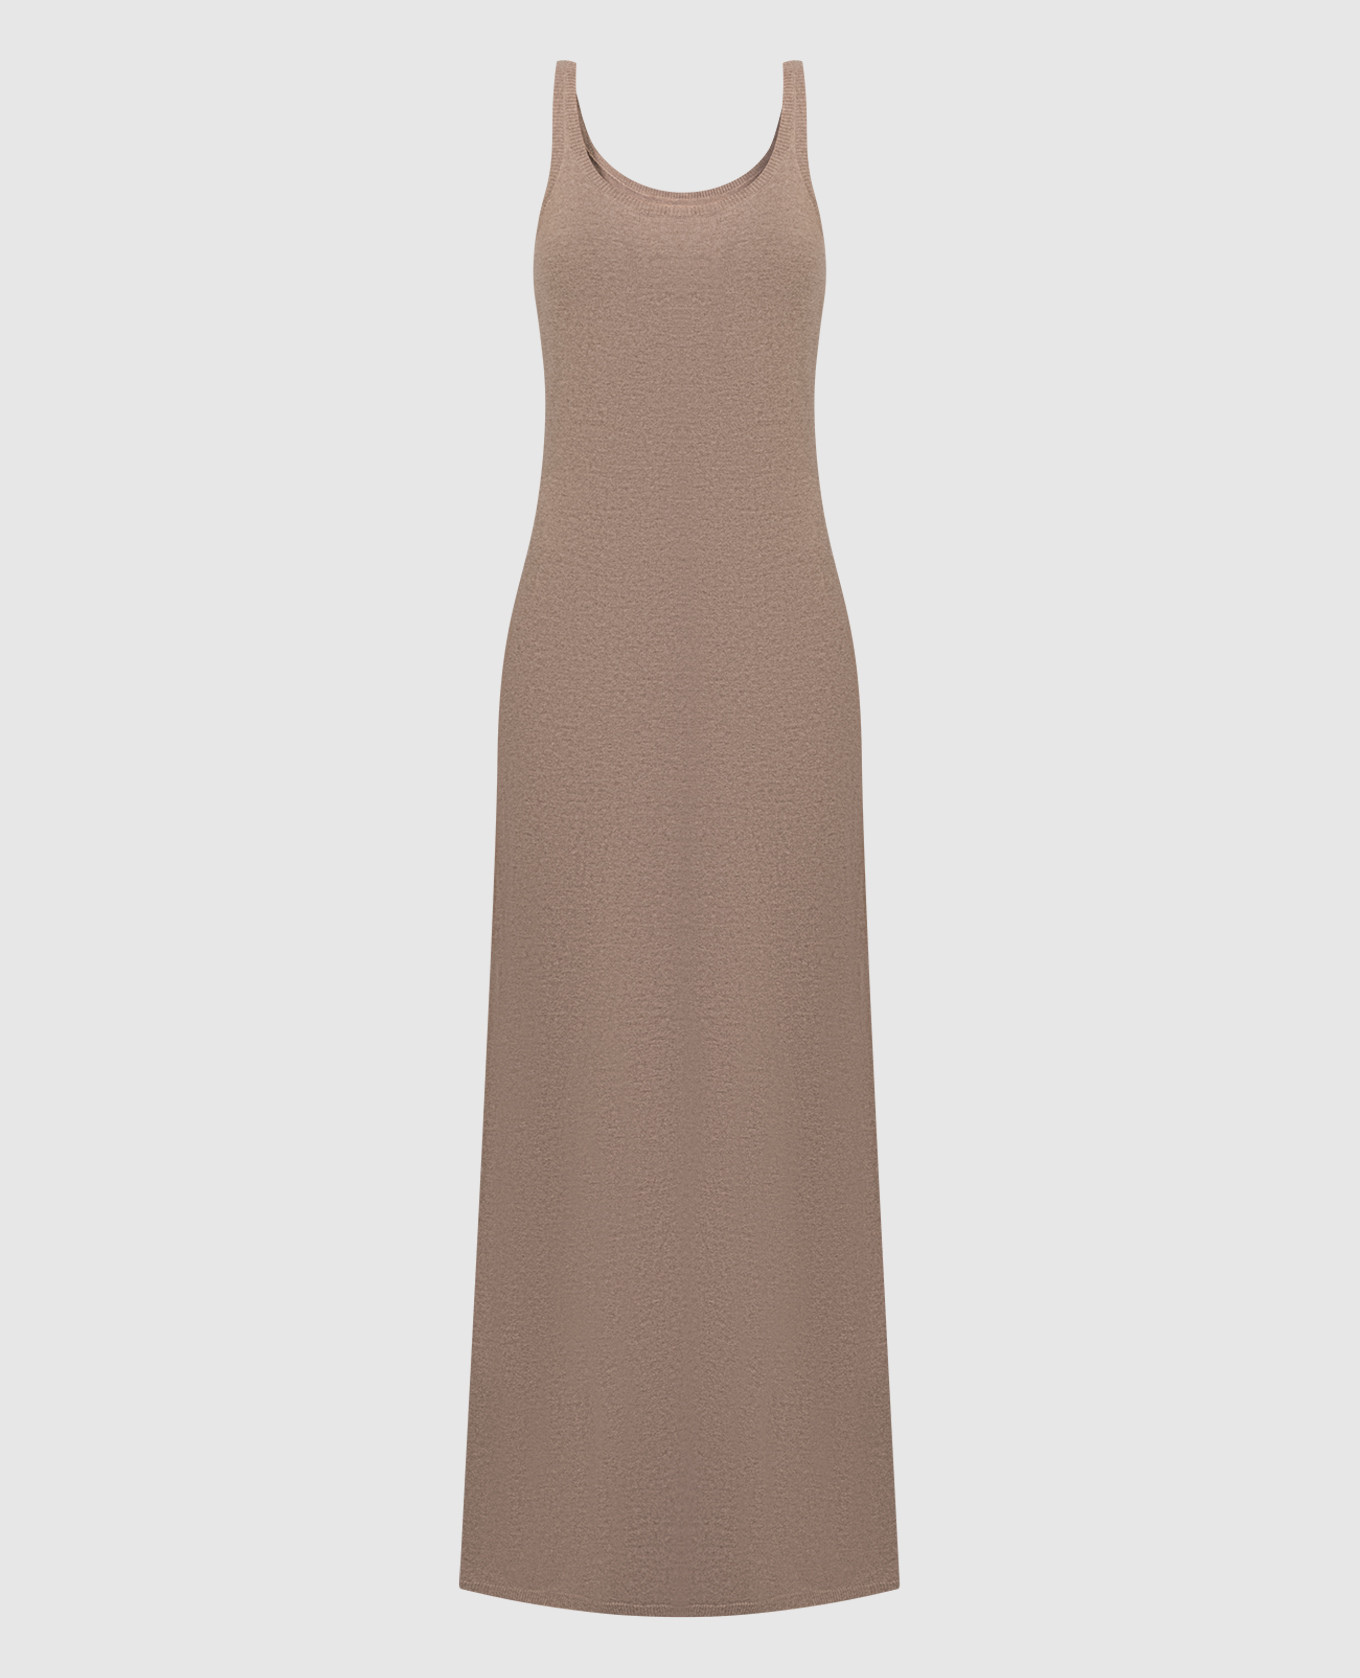 Sandalo beige maxi dress made of wool and cashmere